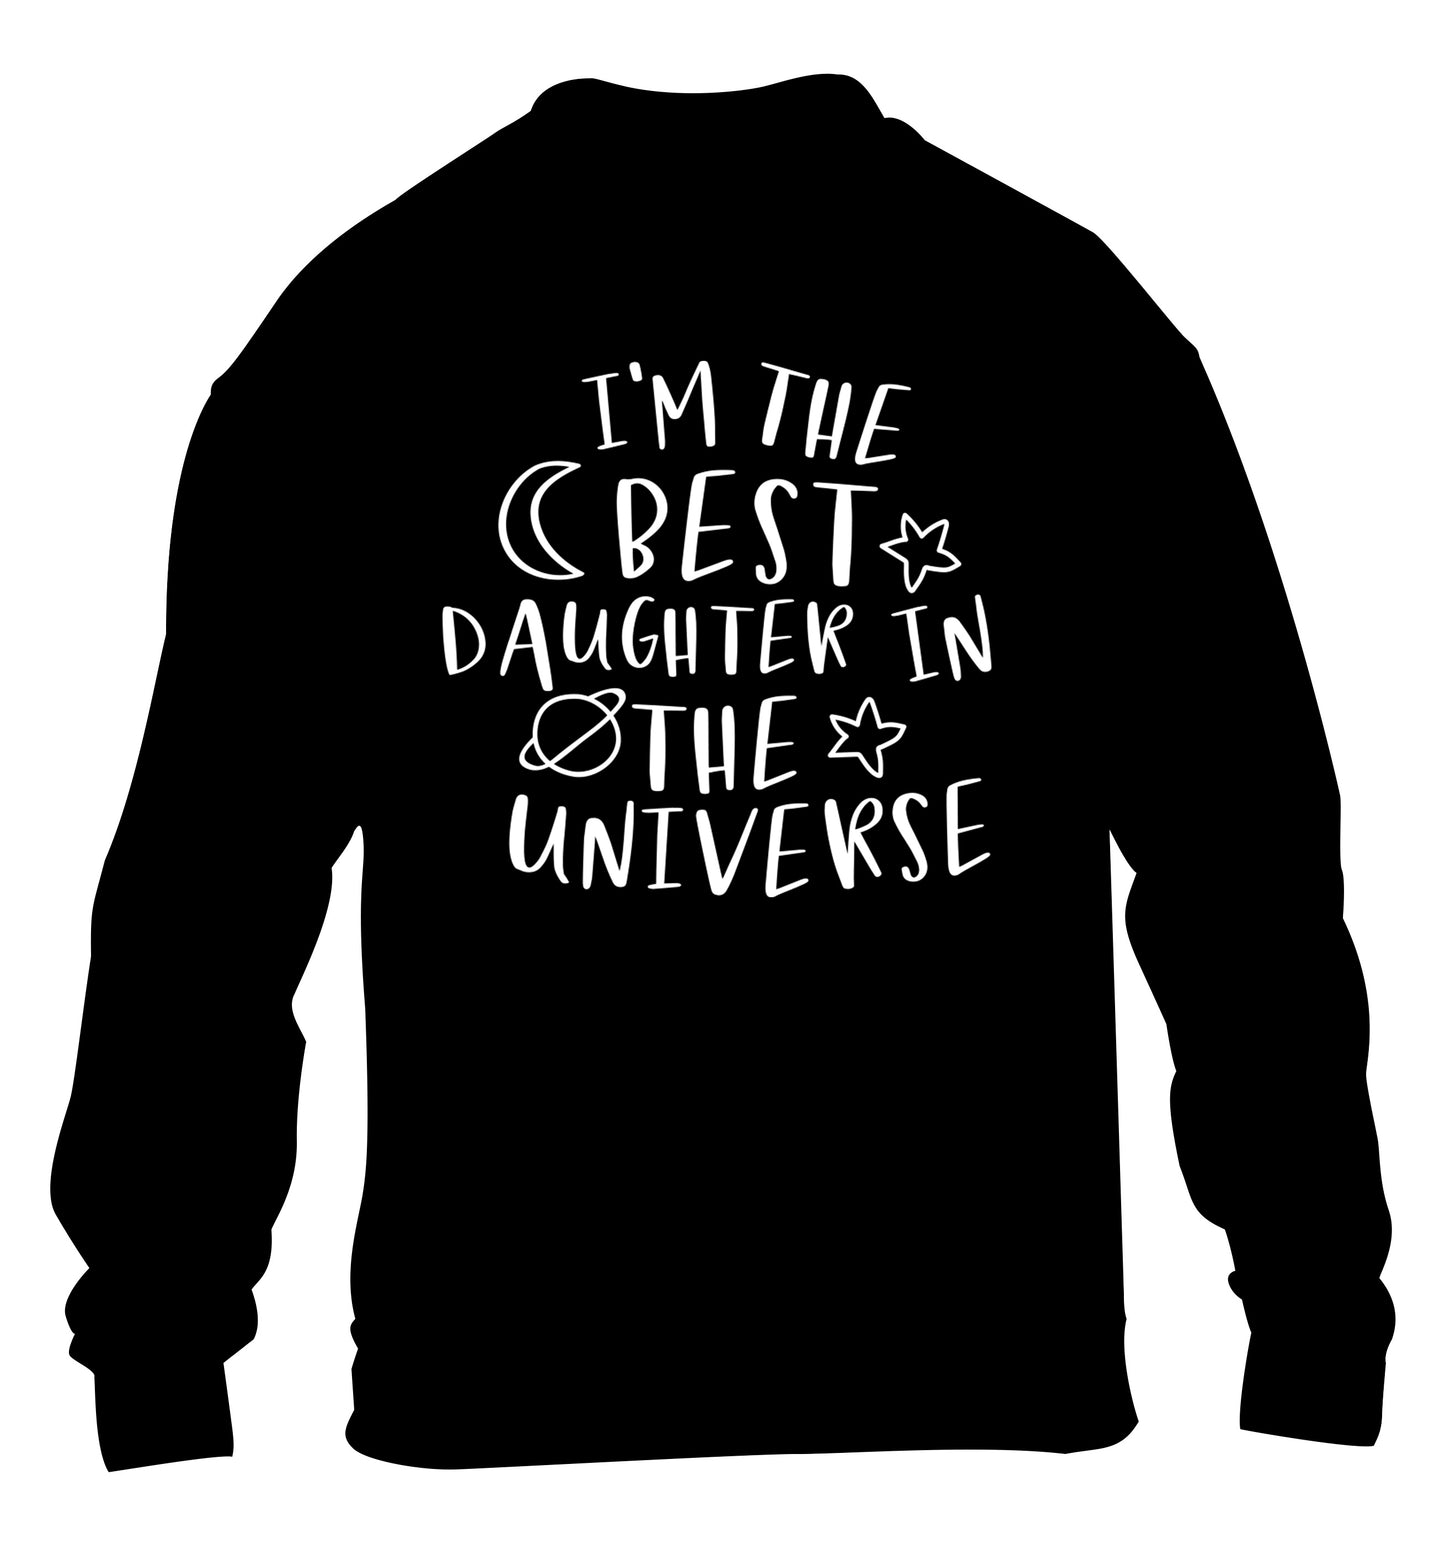 I'm the best daughter in the universe children's black sweater 12-13 Years